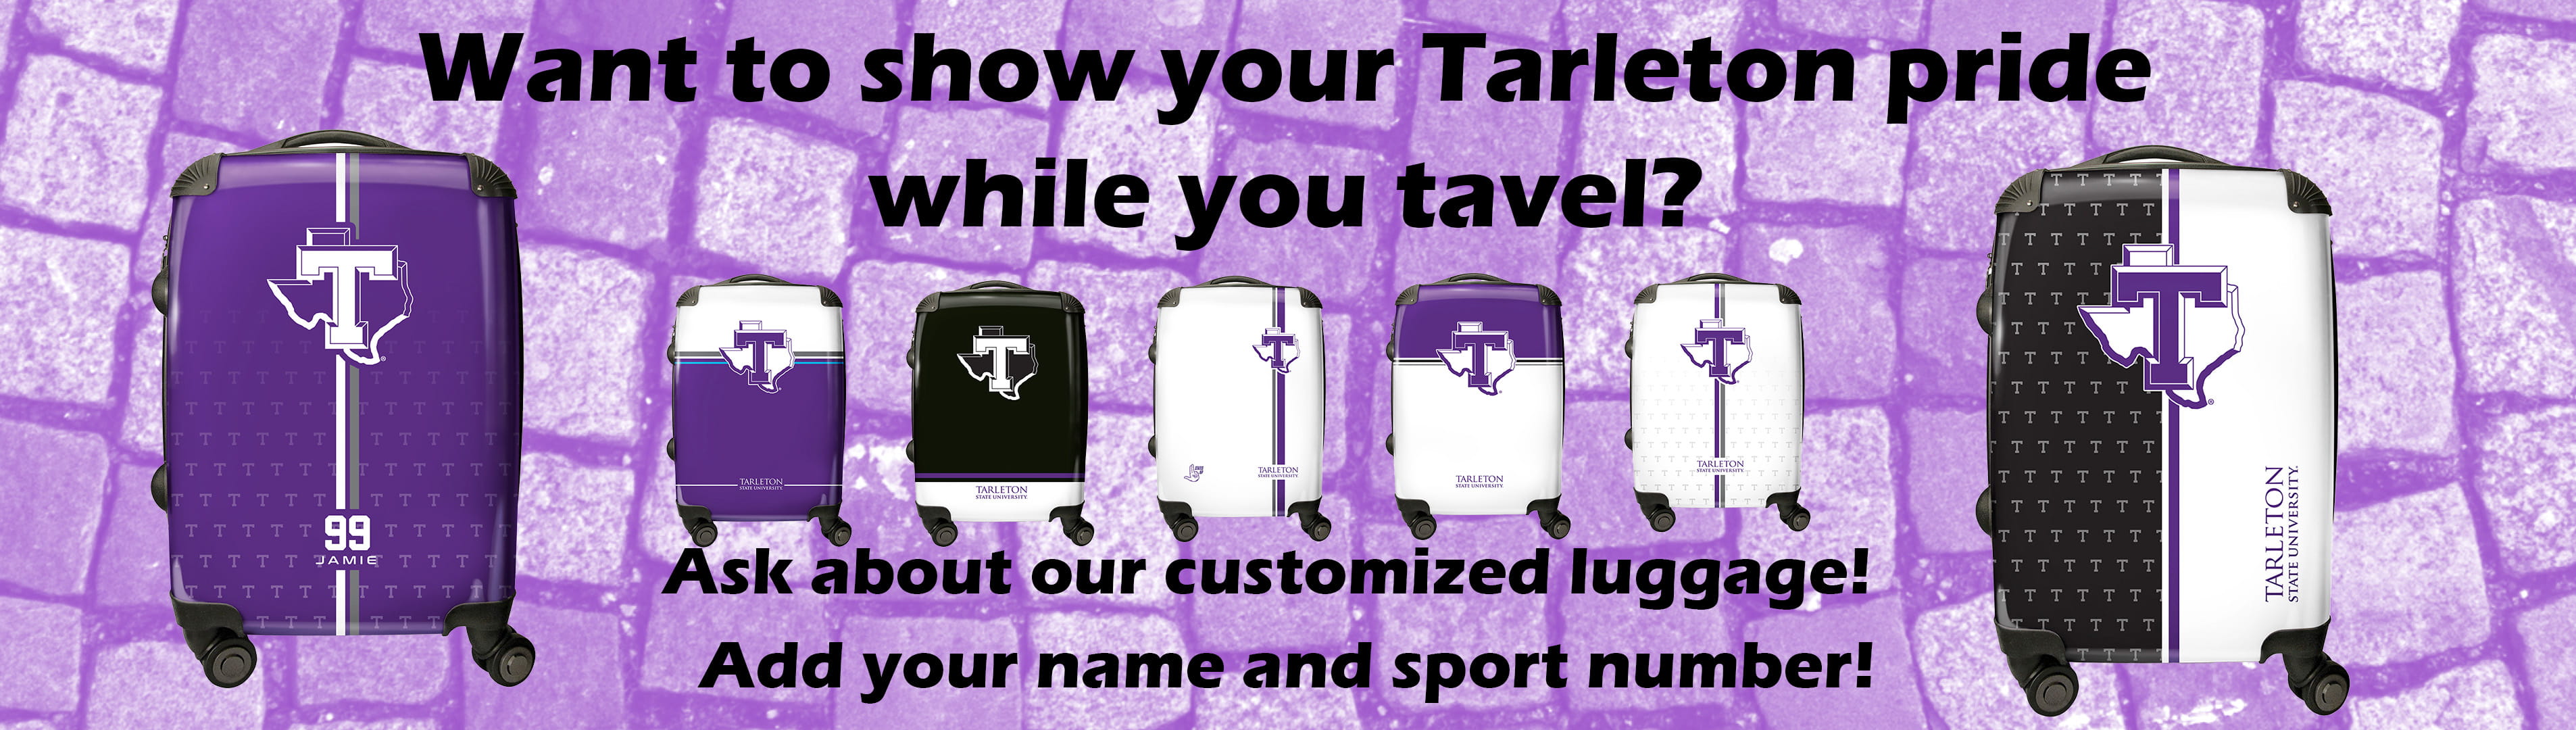 Show your Tarleton Pride with customized luggage